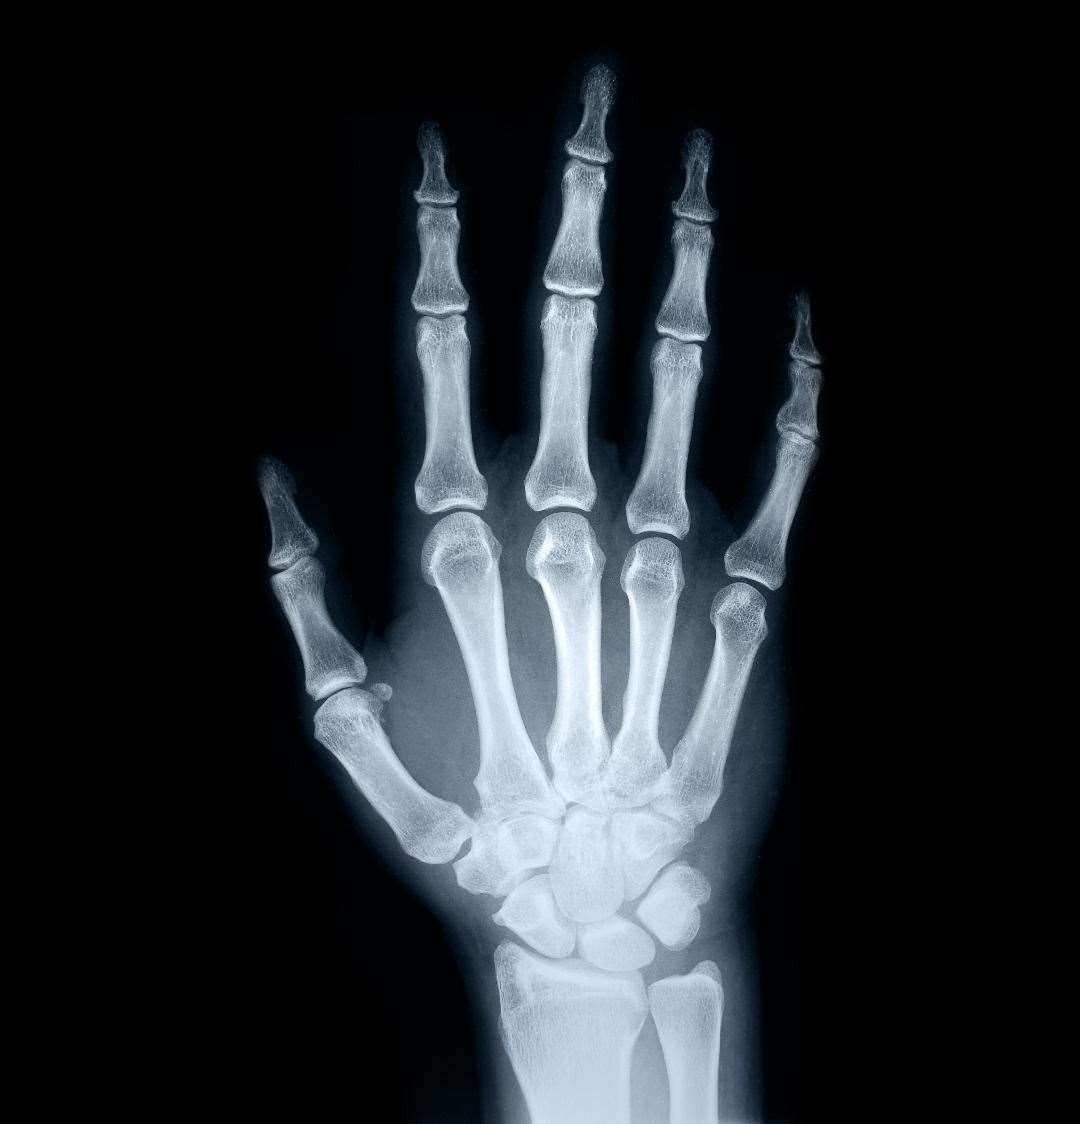 Marie Curie developed the technique of making X-rays